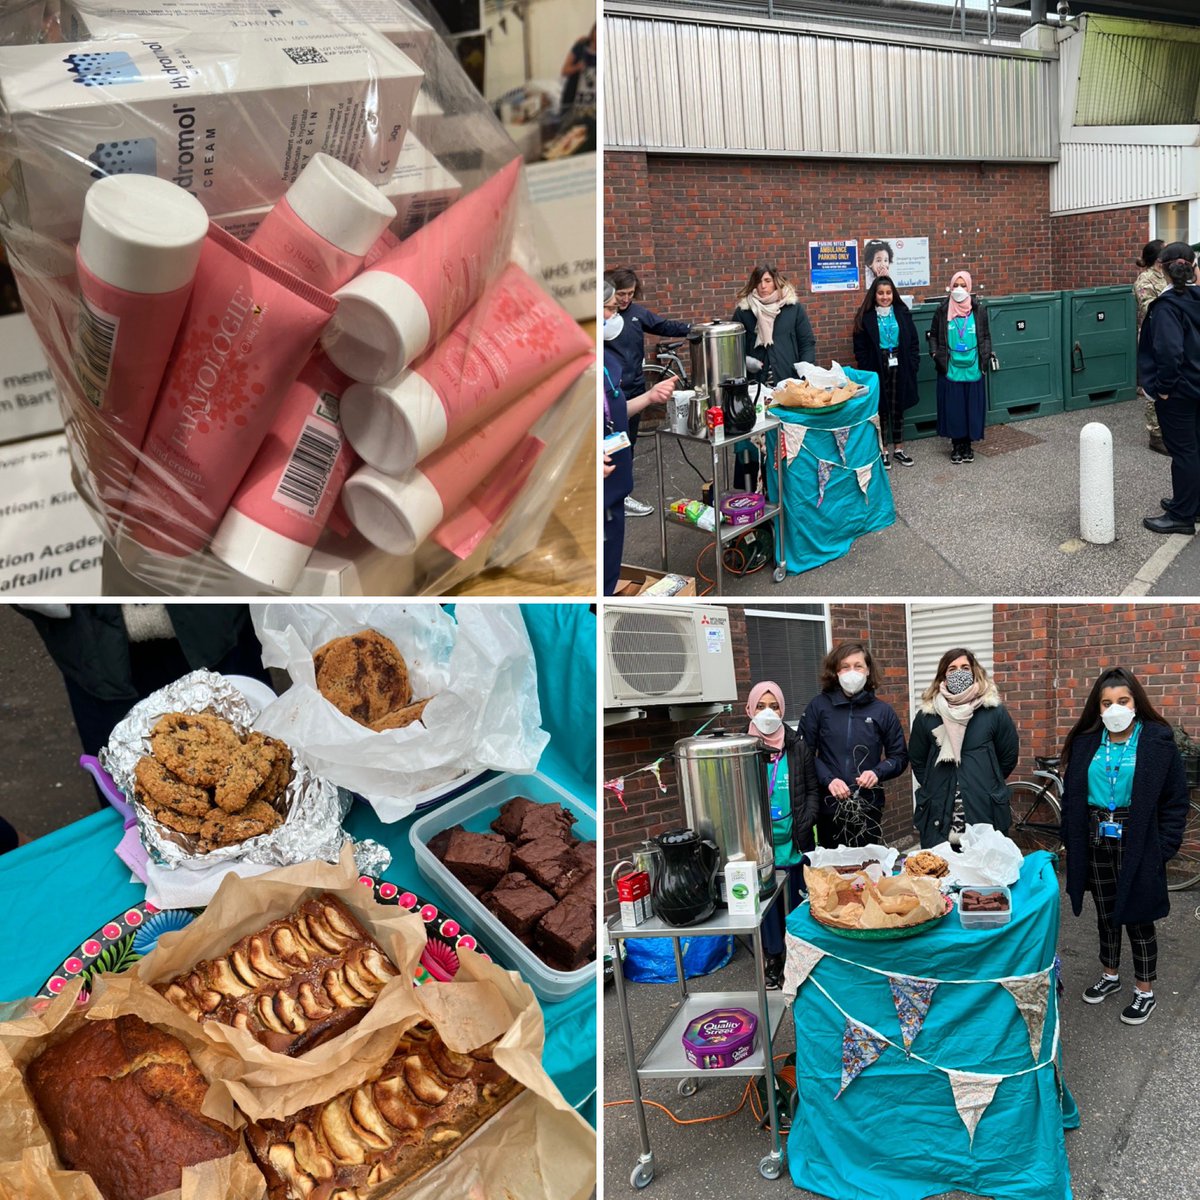 Thanks to all the volunteers & @dremmayoung @chrisodedun for organising a #WellbeingWednesday #BHWellbeing #TeaTrolley #Cakes #PsychologySupport which was really appreciated by busy department & @Ldn_Ambulance teams #CheckIn #Wave4 @laird154 @DrCarlaCroft